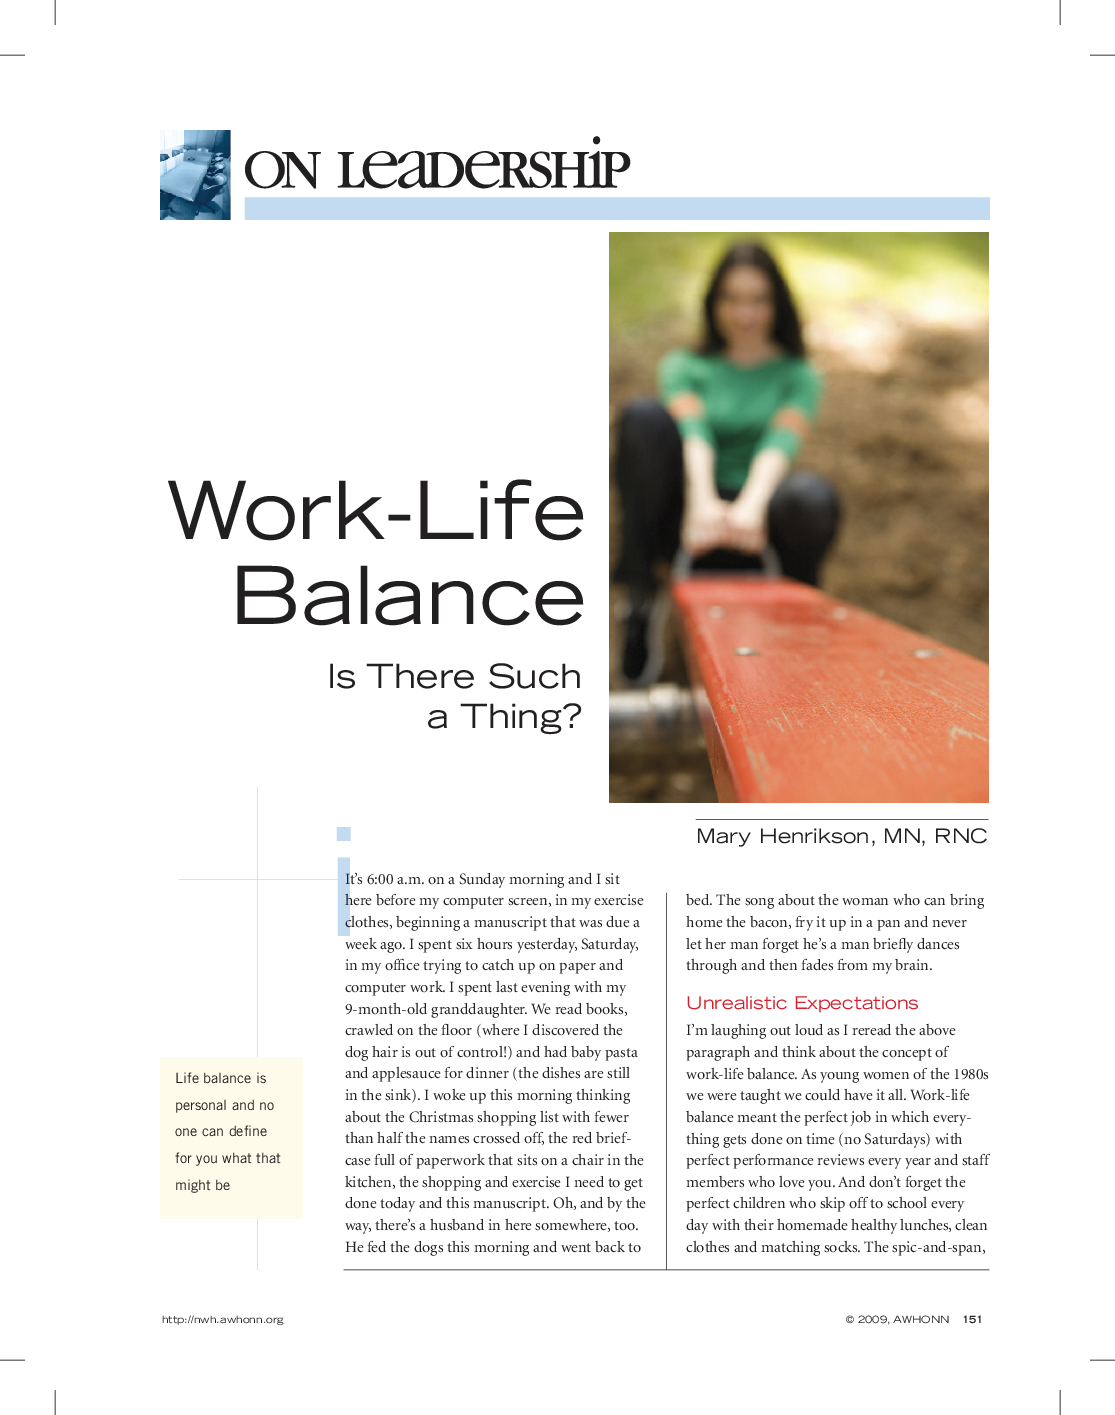 Work-Life Balance: Is There Such a Thing?